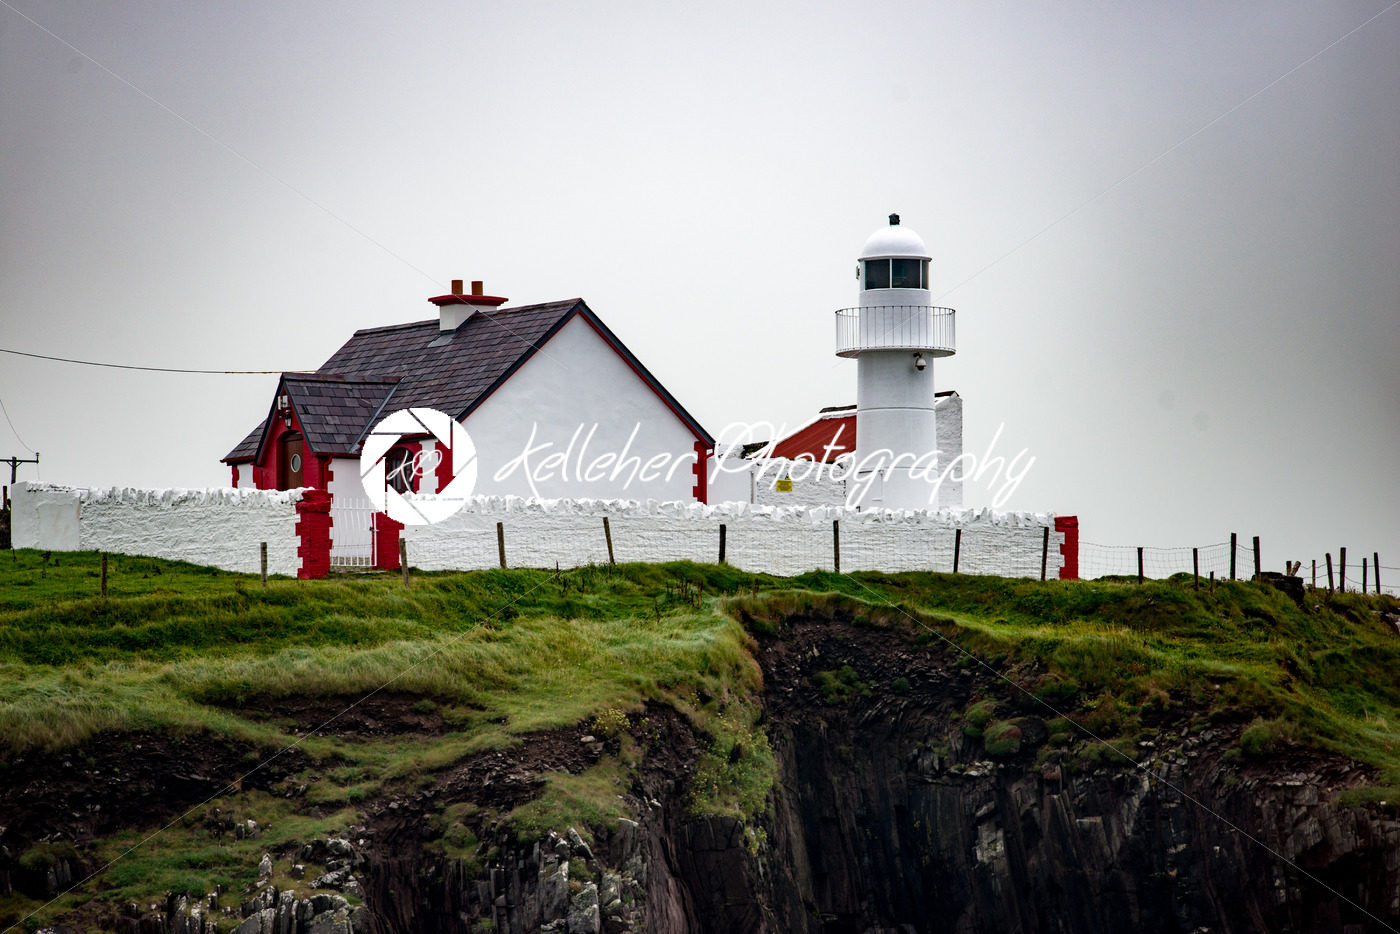 The lighthouse on a cliff in Dingle, Ireland - Kelleher Photography Store